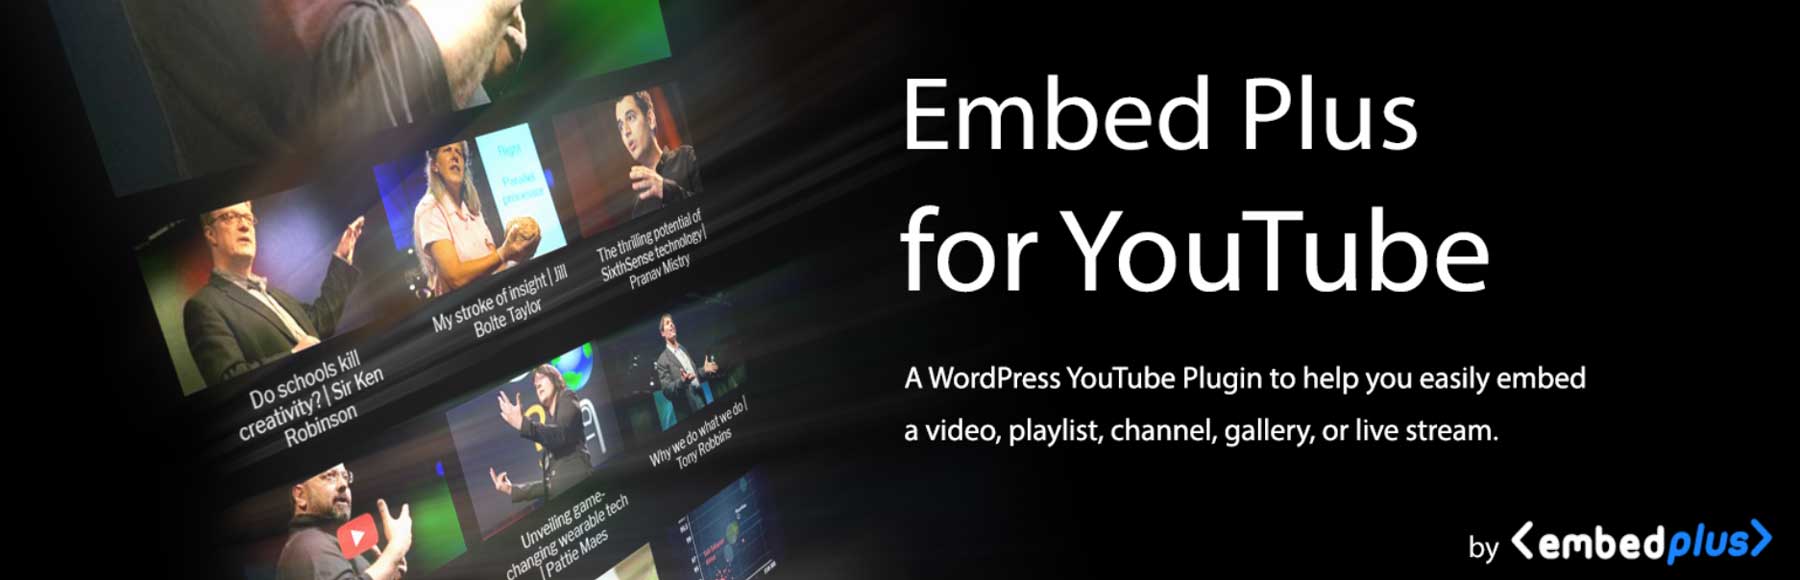 Embed Plus for YouTube plugin